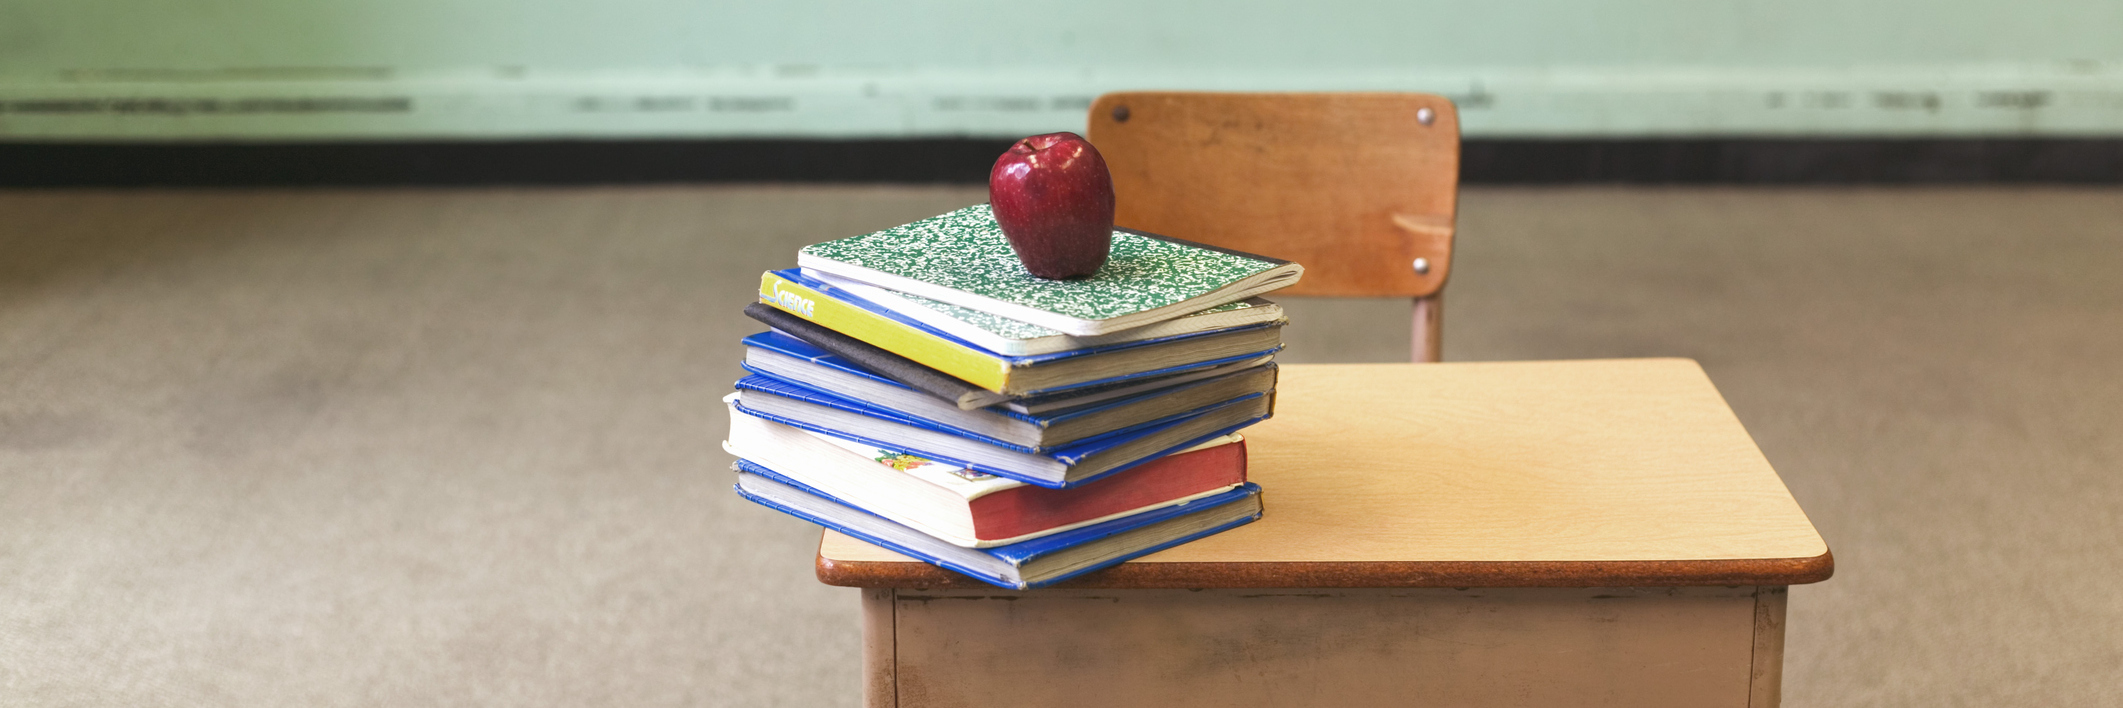 Stack of school books and apple on desk in empty classroom